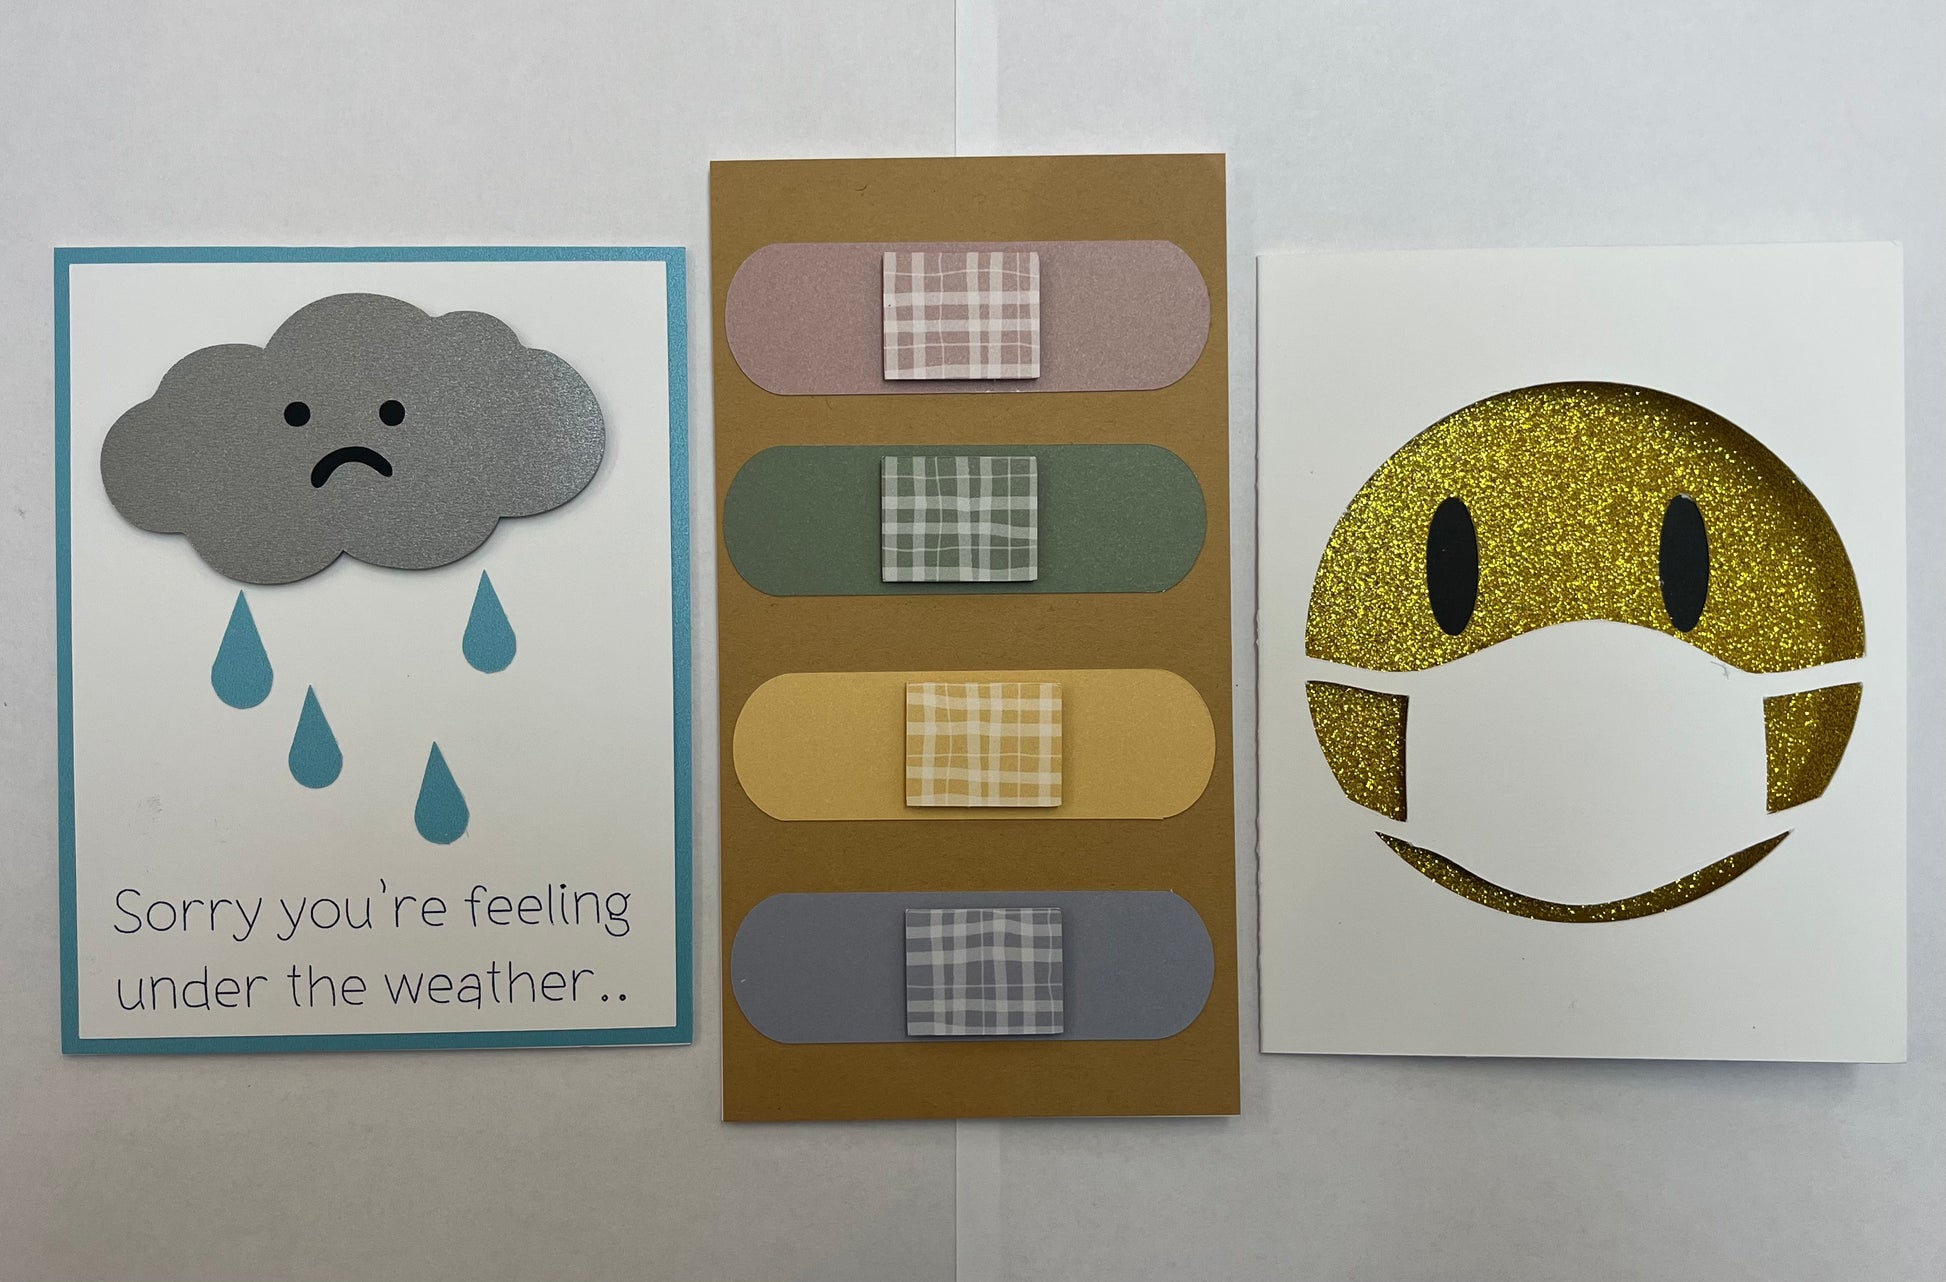 Get Well Card - Storm and Sky Shoppe - EK Crafts